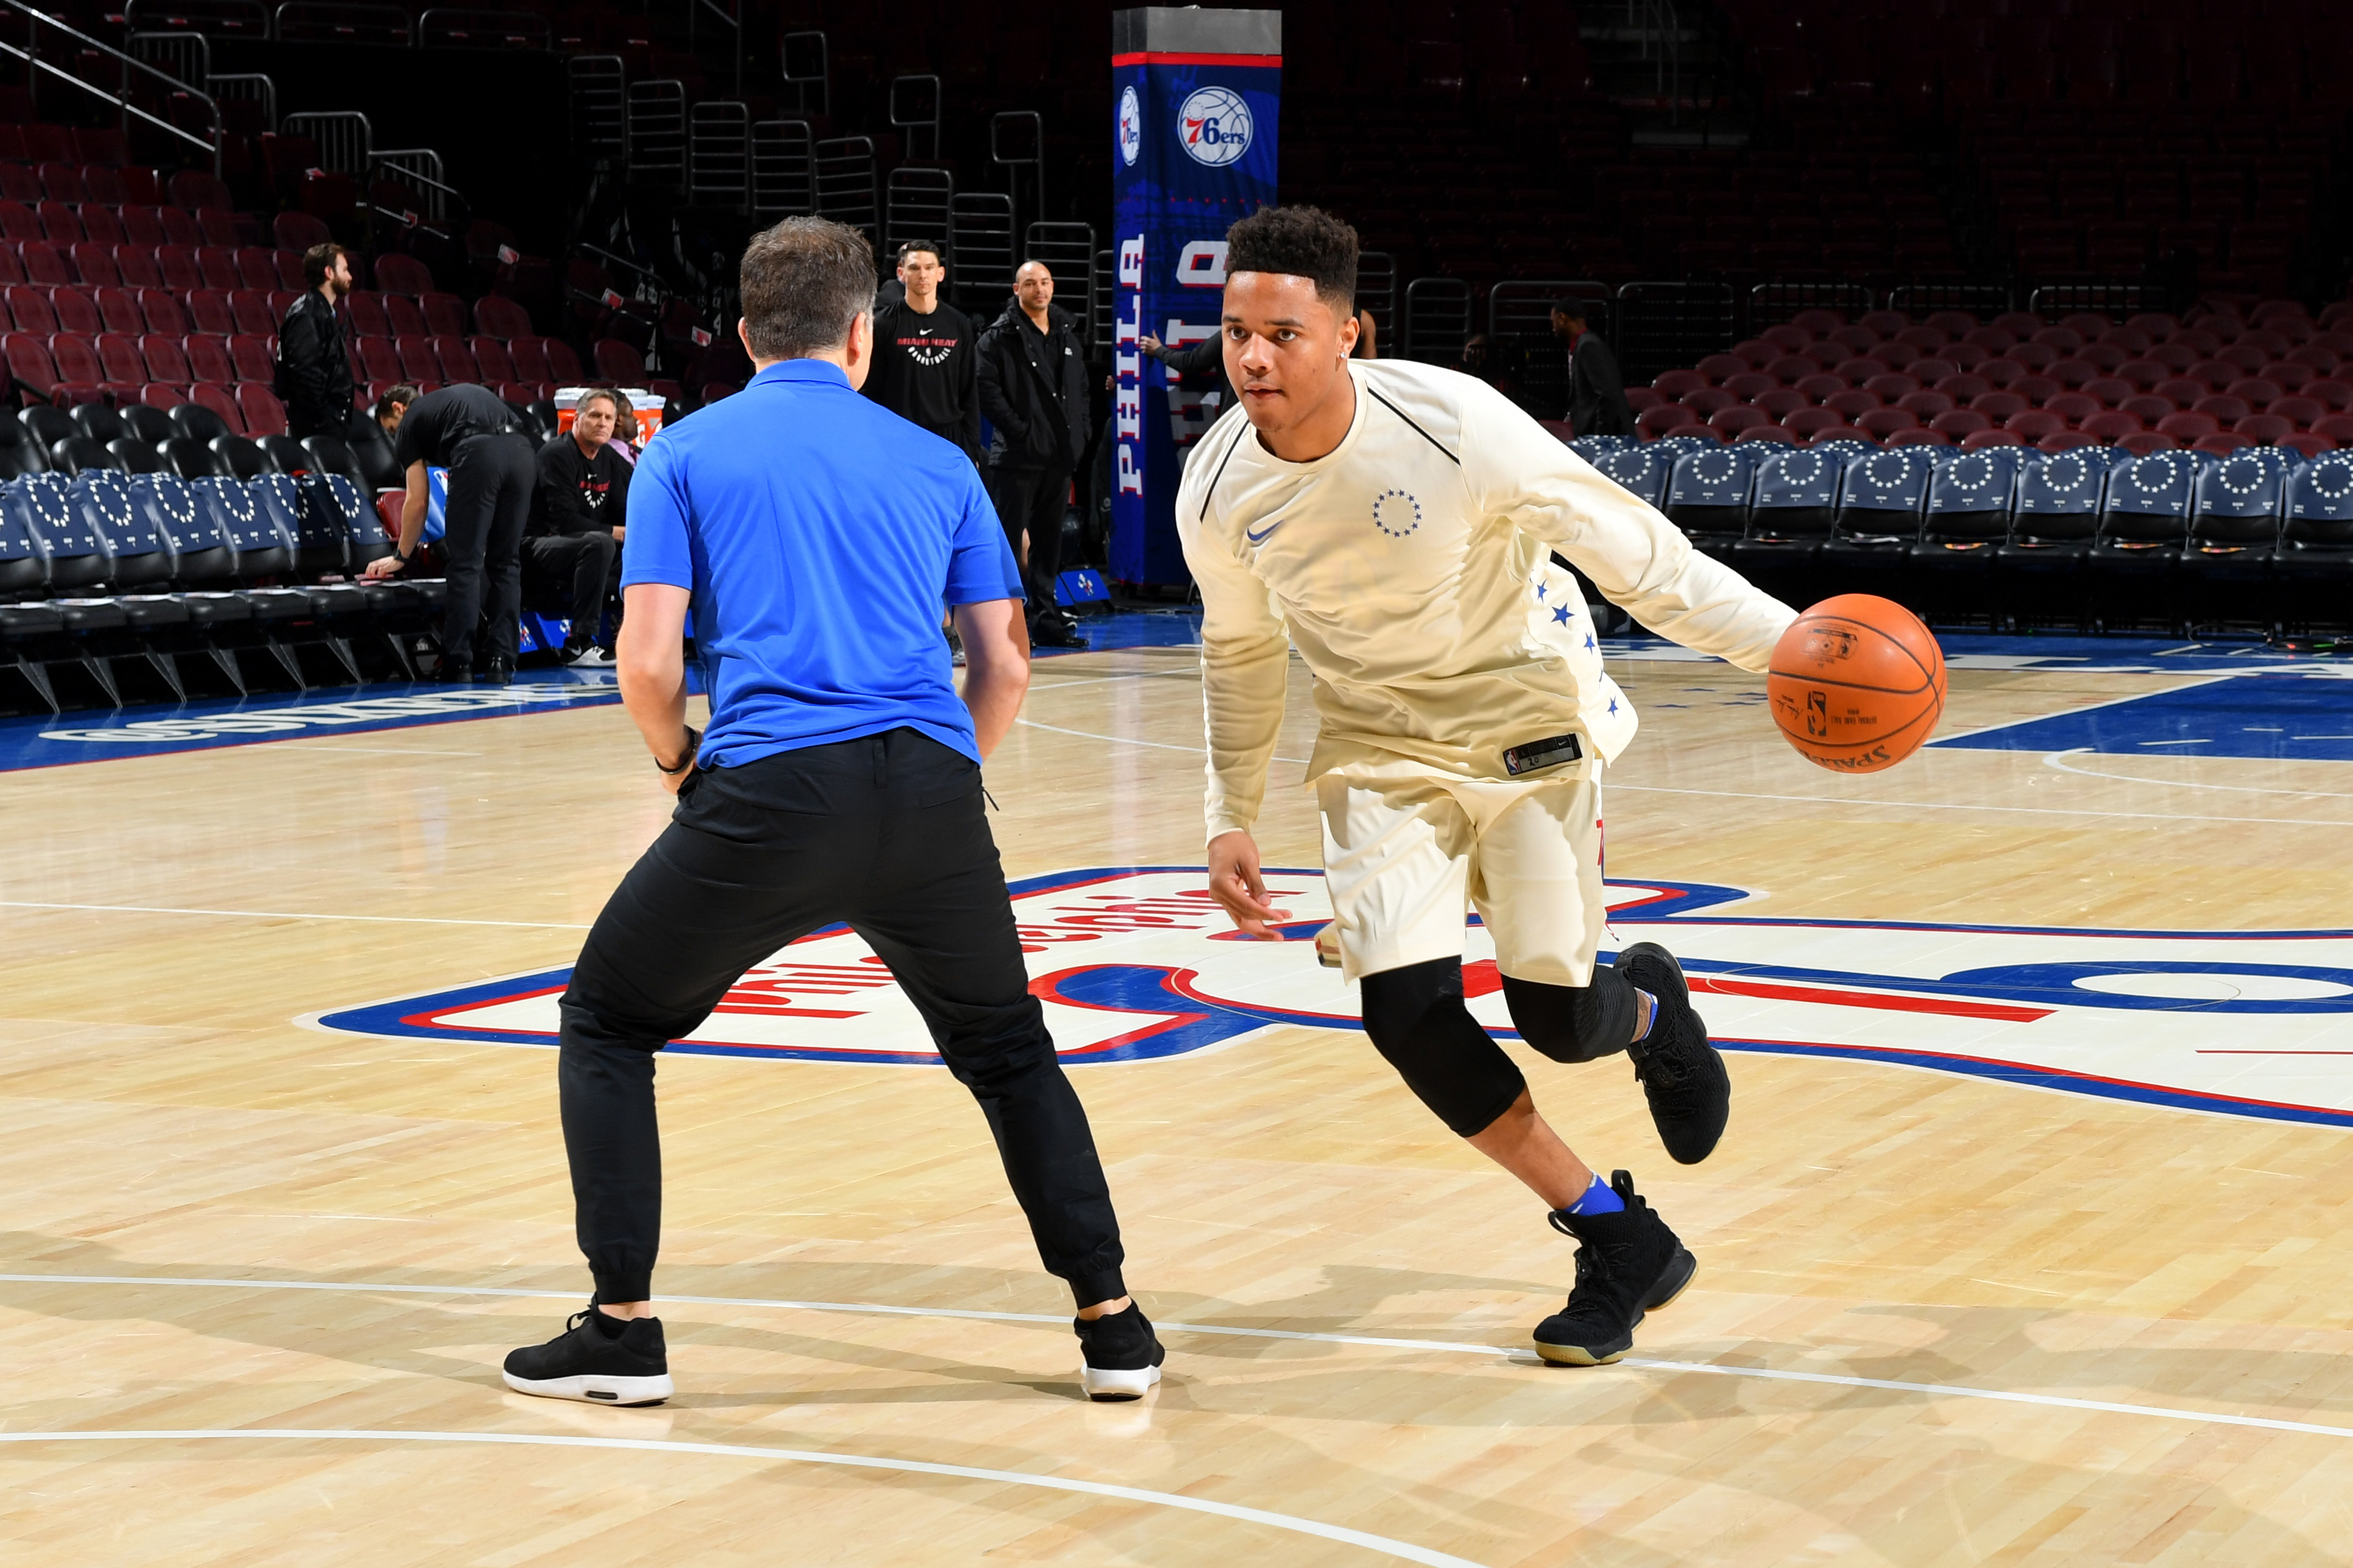 Time for top pick Markelle Fultz to turn Philadelphia 76ers into winners